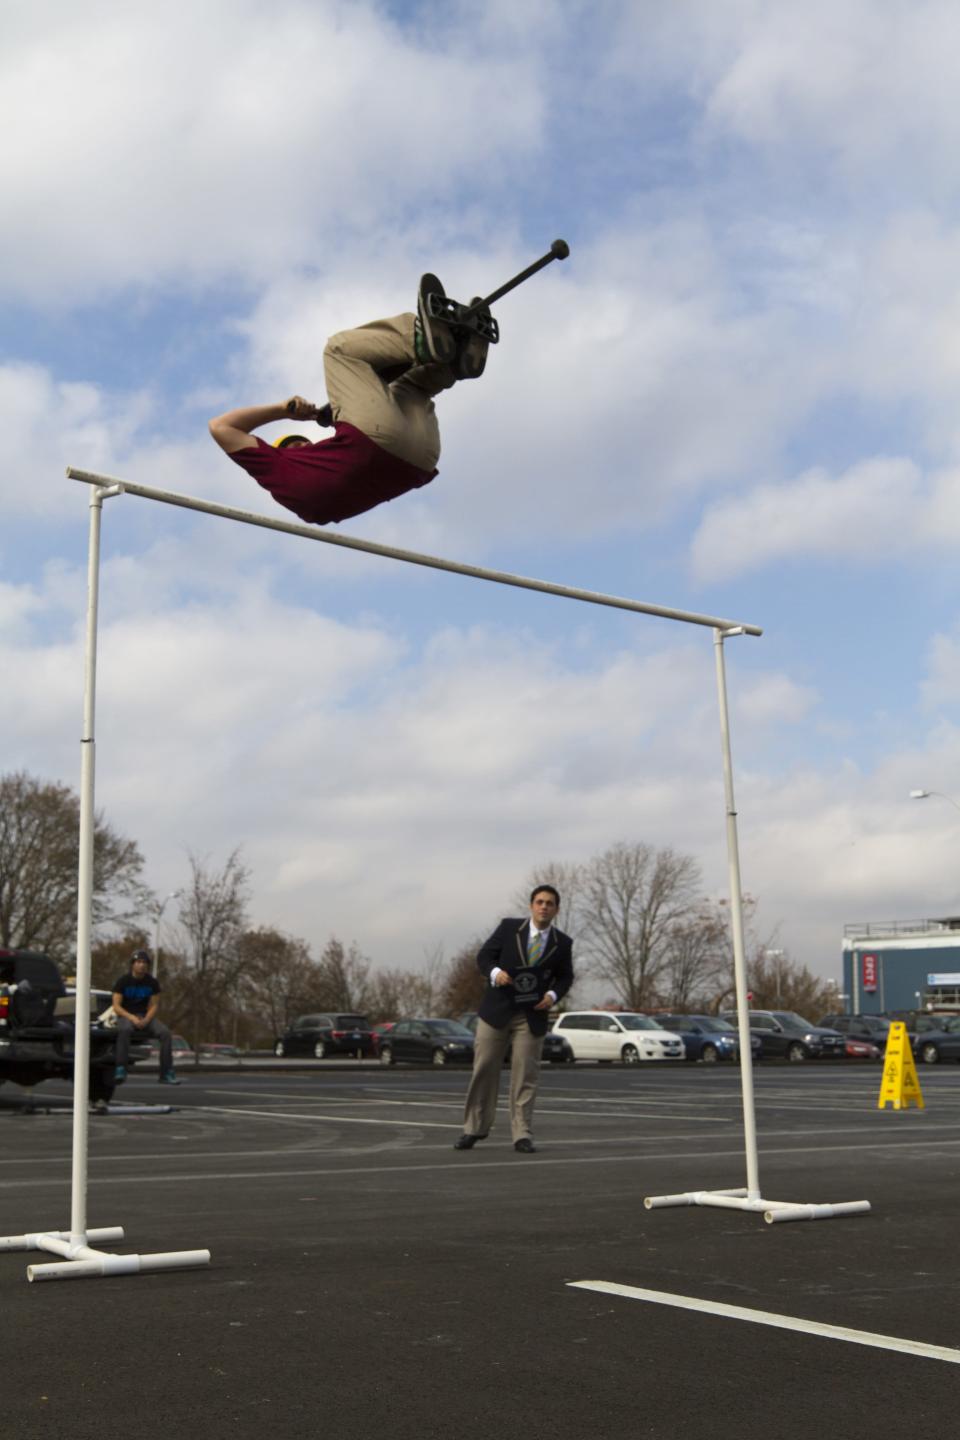 Tone Staub also broke the record for the highest forward flip pogo stick jump is 8 feet (Philip Robertson/Guinness World Records)